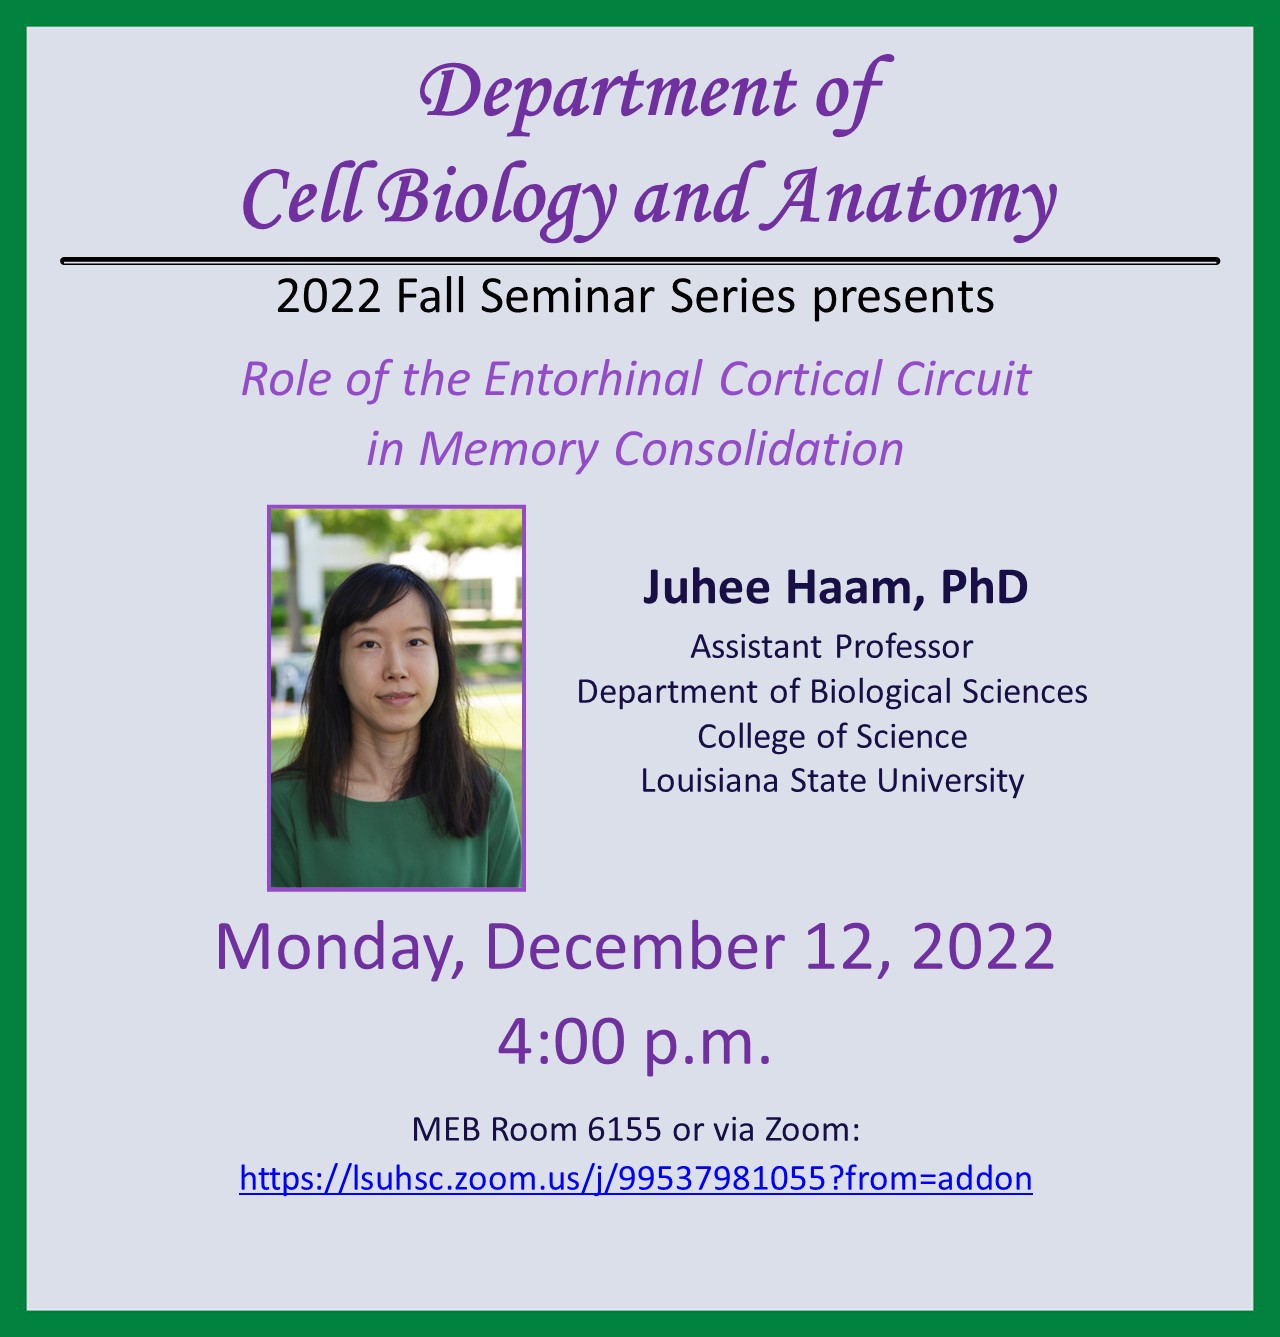 Event Title: Department of Cell Biology and Anatomy 2022 Fall Seminar Series Juhee Haam, PhD, Event Date: December 12, Starting at 04:00 PM and ending at 05:00 PM in Building: Medical Education Building Room: 6155